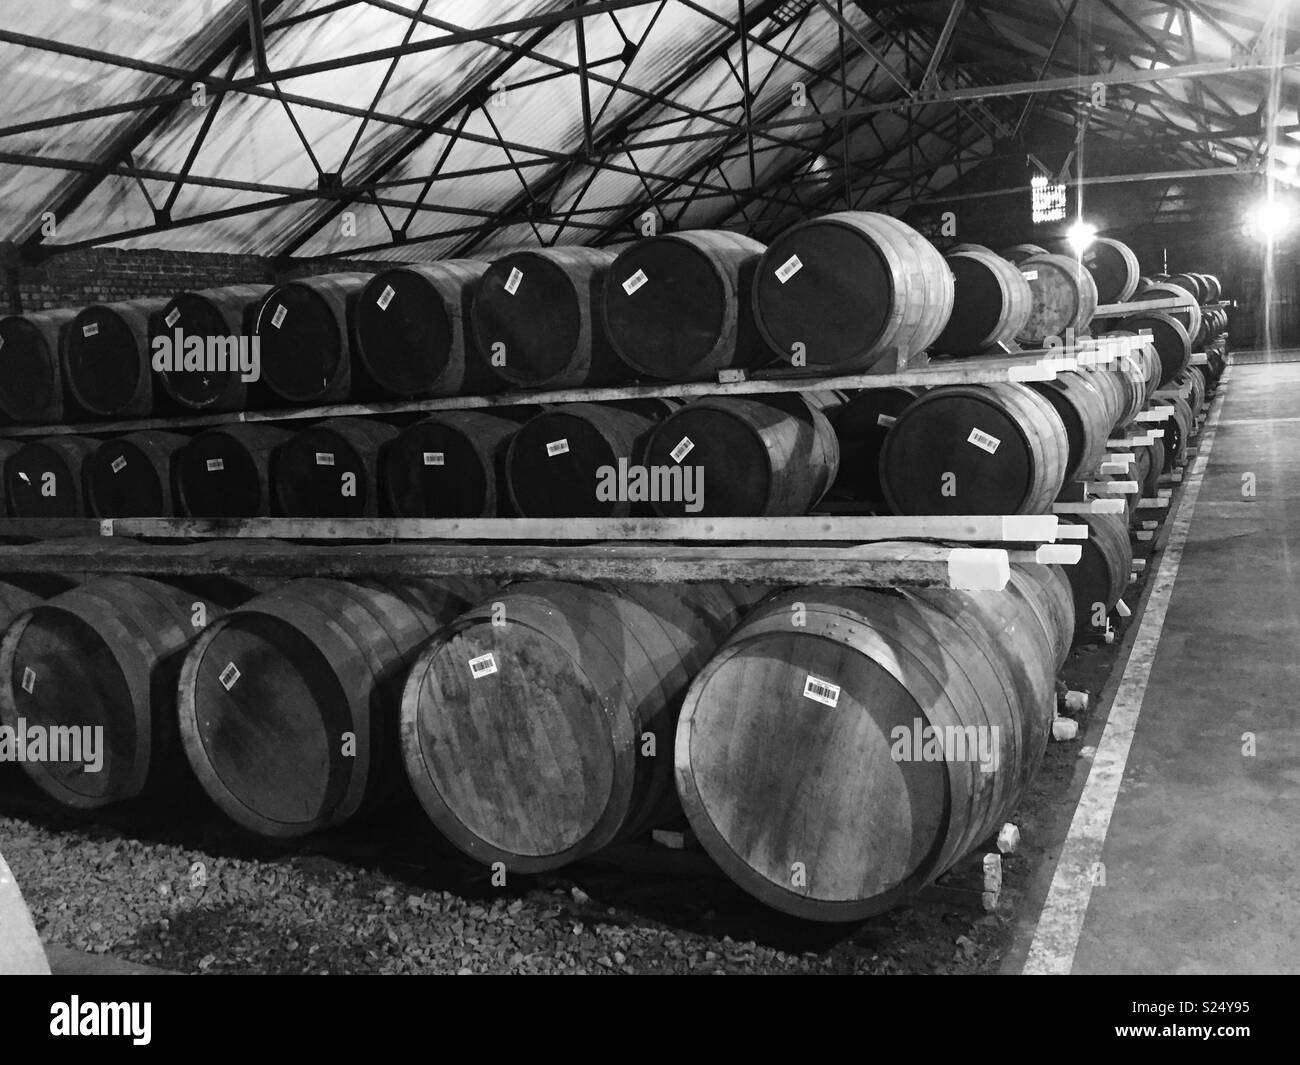 Barrels of whisky in a distillery Stock Photo